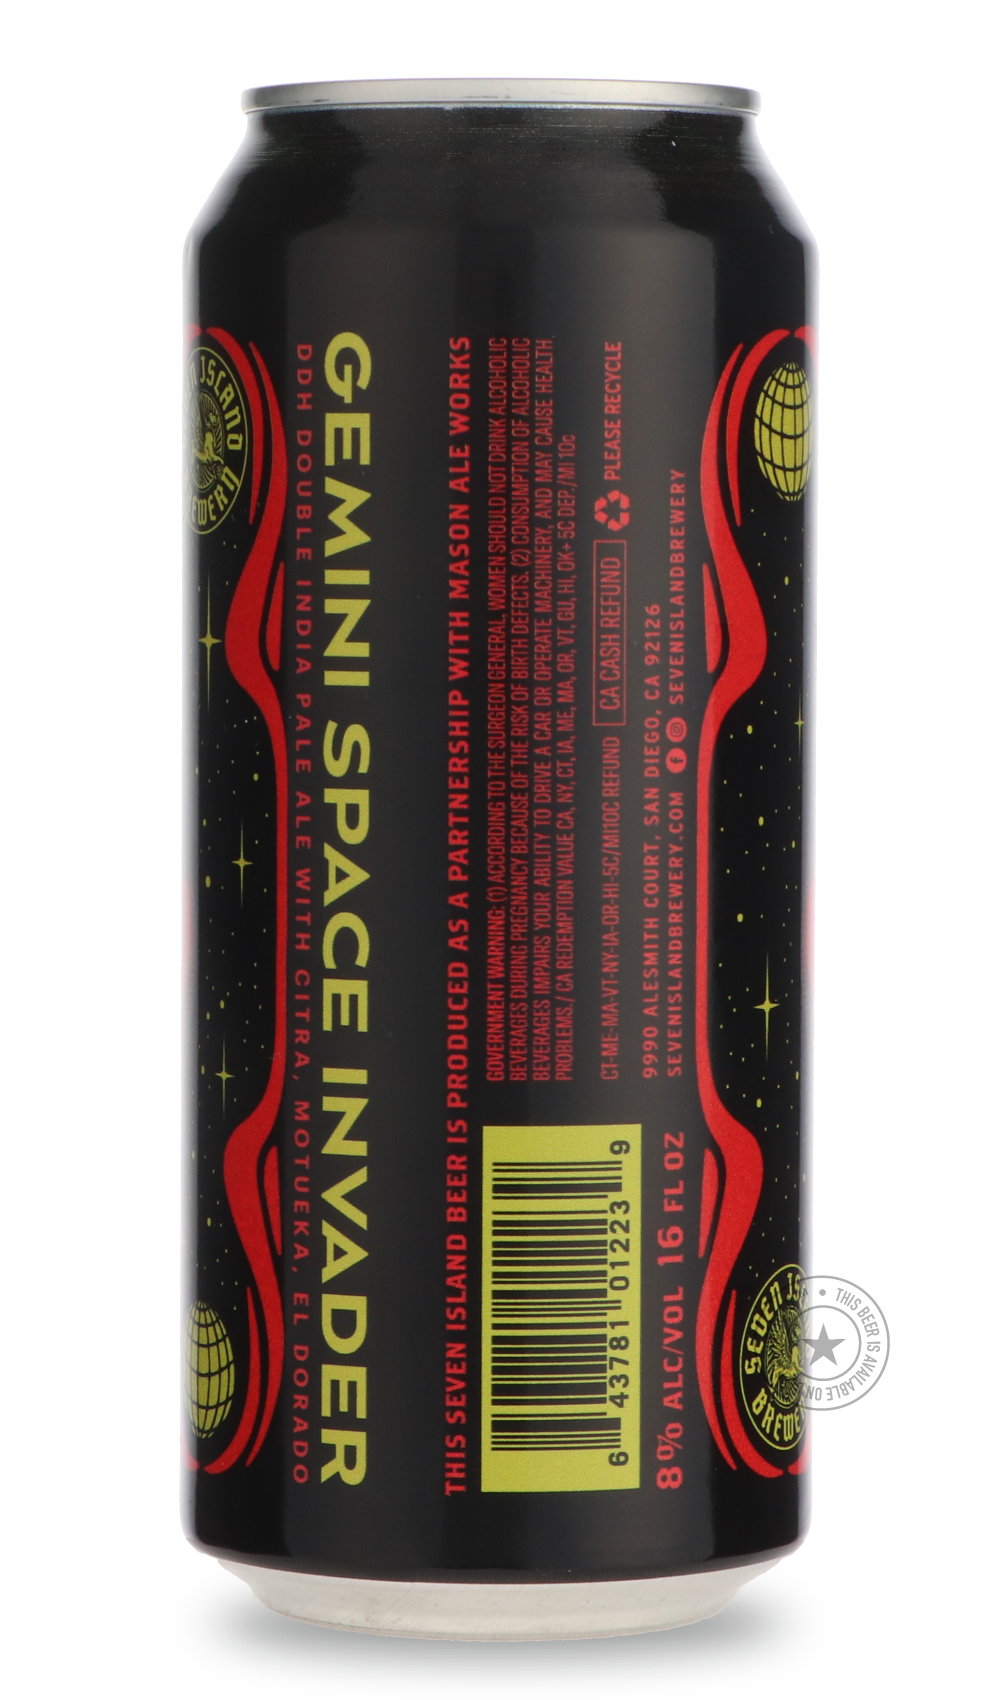 -Mason Ale Works- Gemini Space Invader / Seven Island-IPA- Only @ Beer Republic - The best online beer store for American & Canadian craft beer - Buy beer online from the USA and Canada - Bier online kopen - Amerikaans bier kopen - Craft beer store - Craft beer kopen - Amerikanisch bier kaufen - Bier online kaufen - Acheter biere online - IPA - Stout - Porter - New England IPA - Hazy IPA - Imperial Stout - Barrel Aged - Barrel Aged Imperial Stout - Brown - Dark beer - Blond - Blonde - Pilsner - Lager - Whea